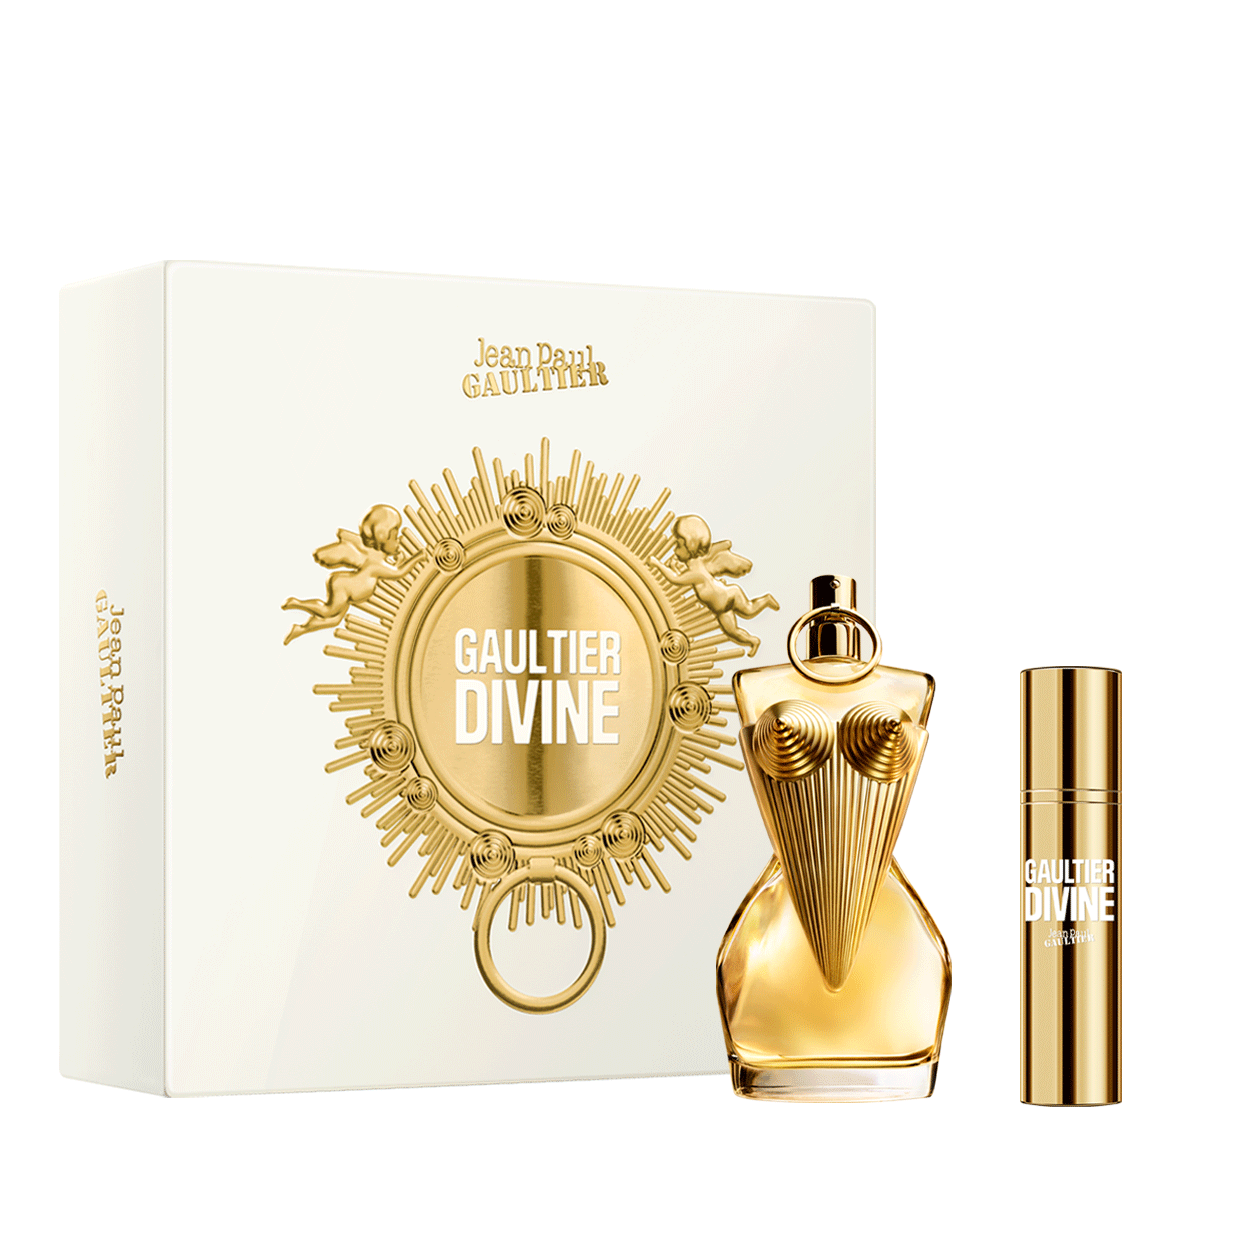 GAULTIER DIVINE 50 ML AND SPRAY 10 ML (Multireferencia)